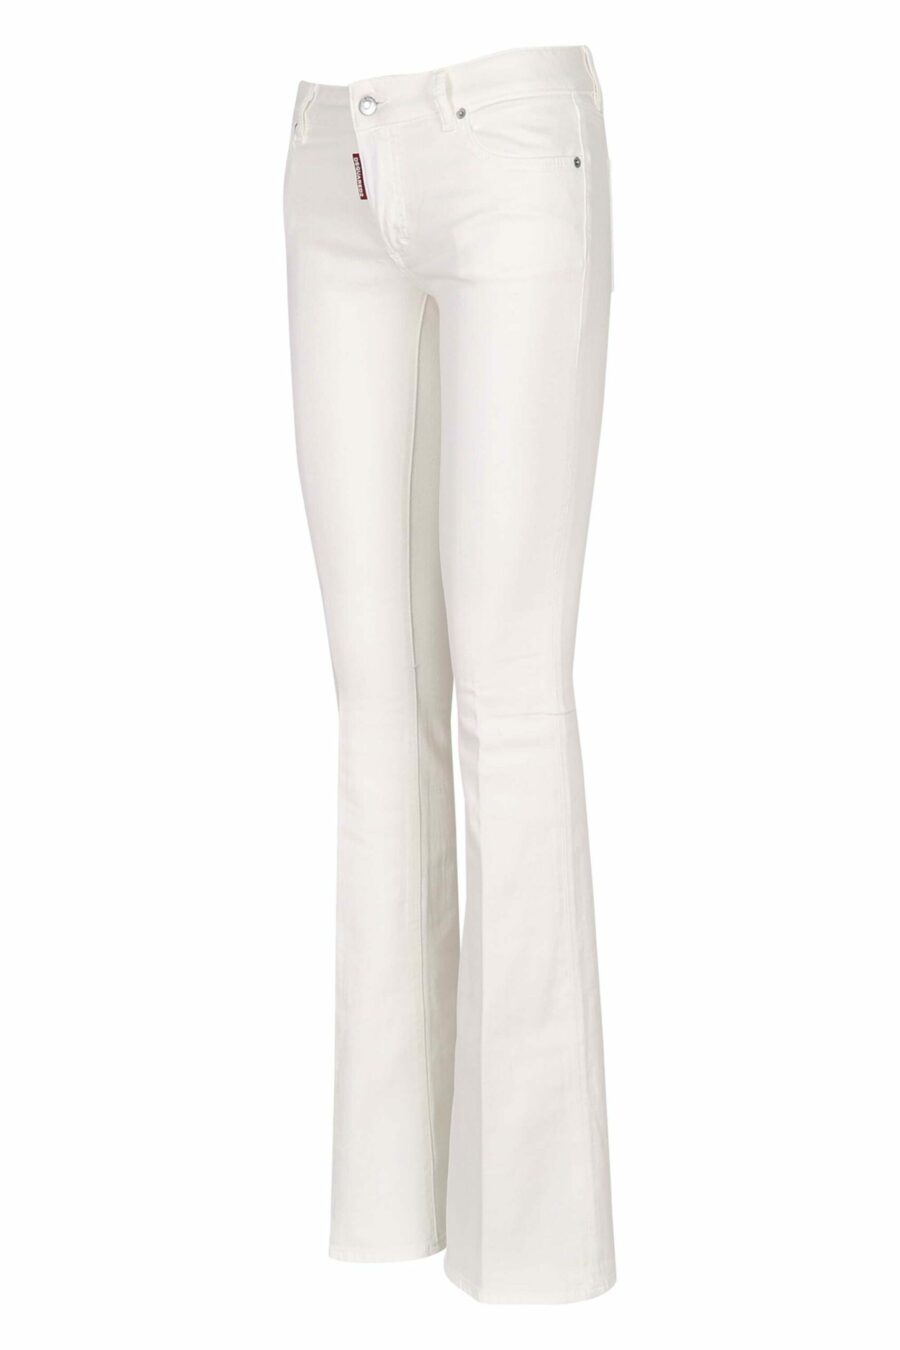 White "twiggy jean" jeans with wide boot - 8054148307912 1 scaled